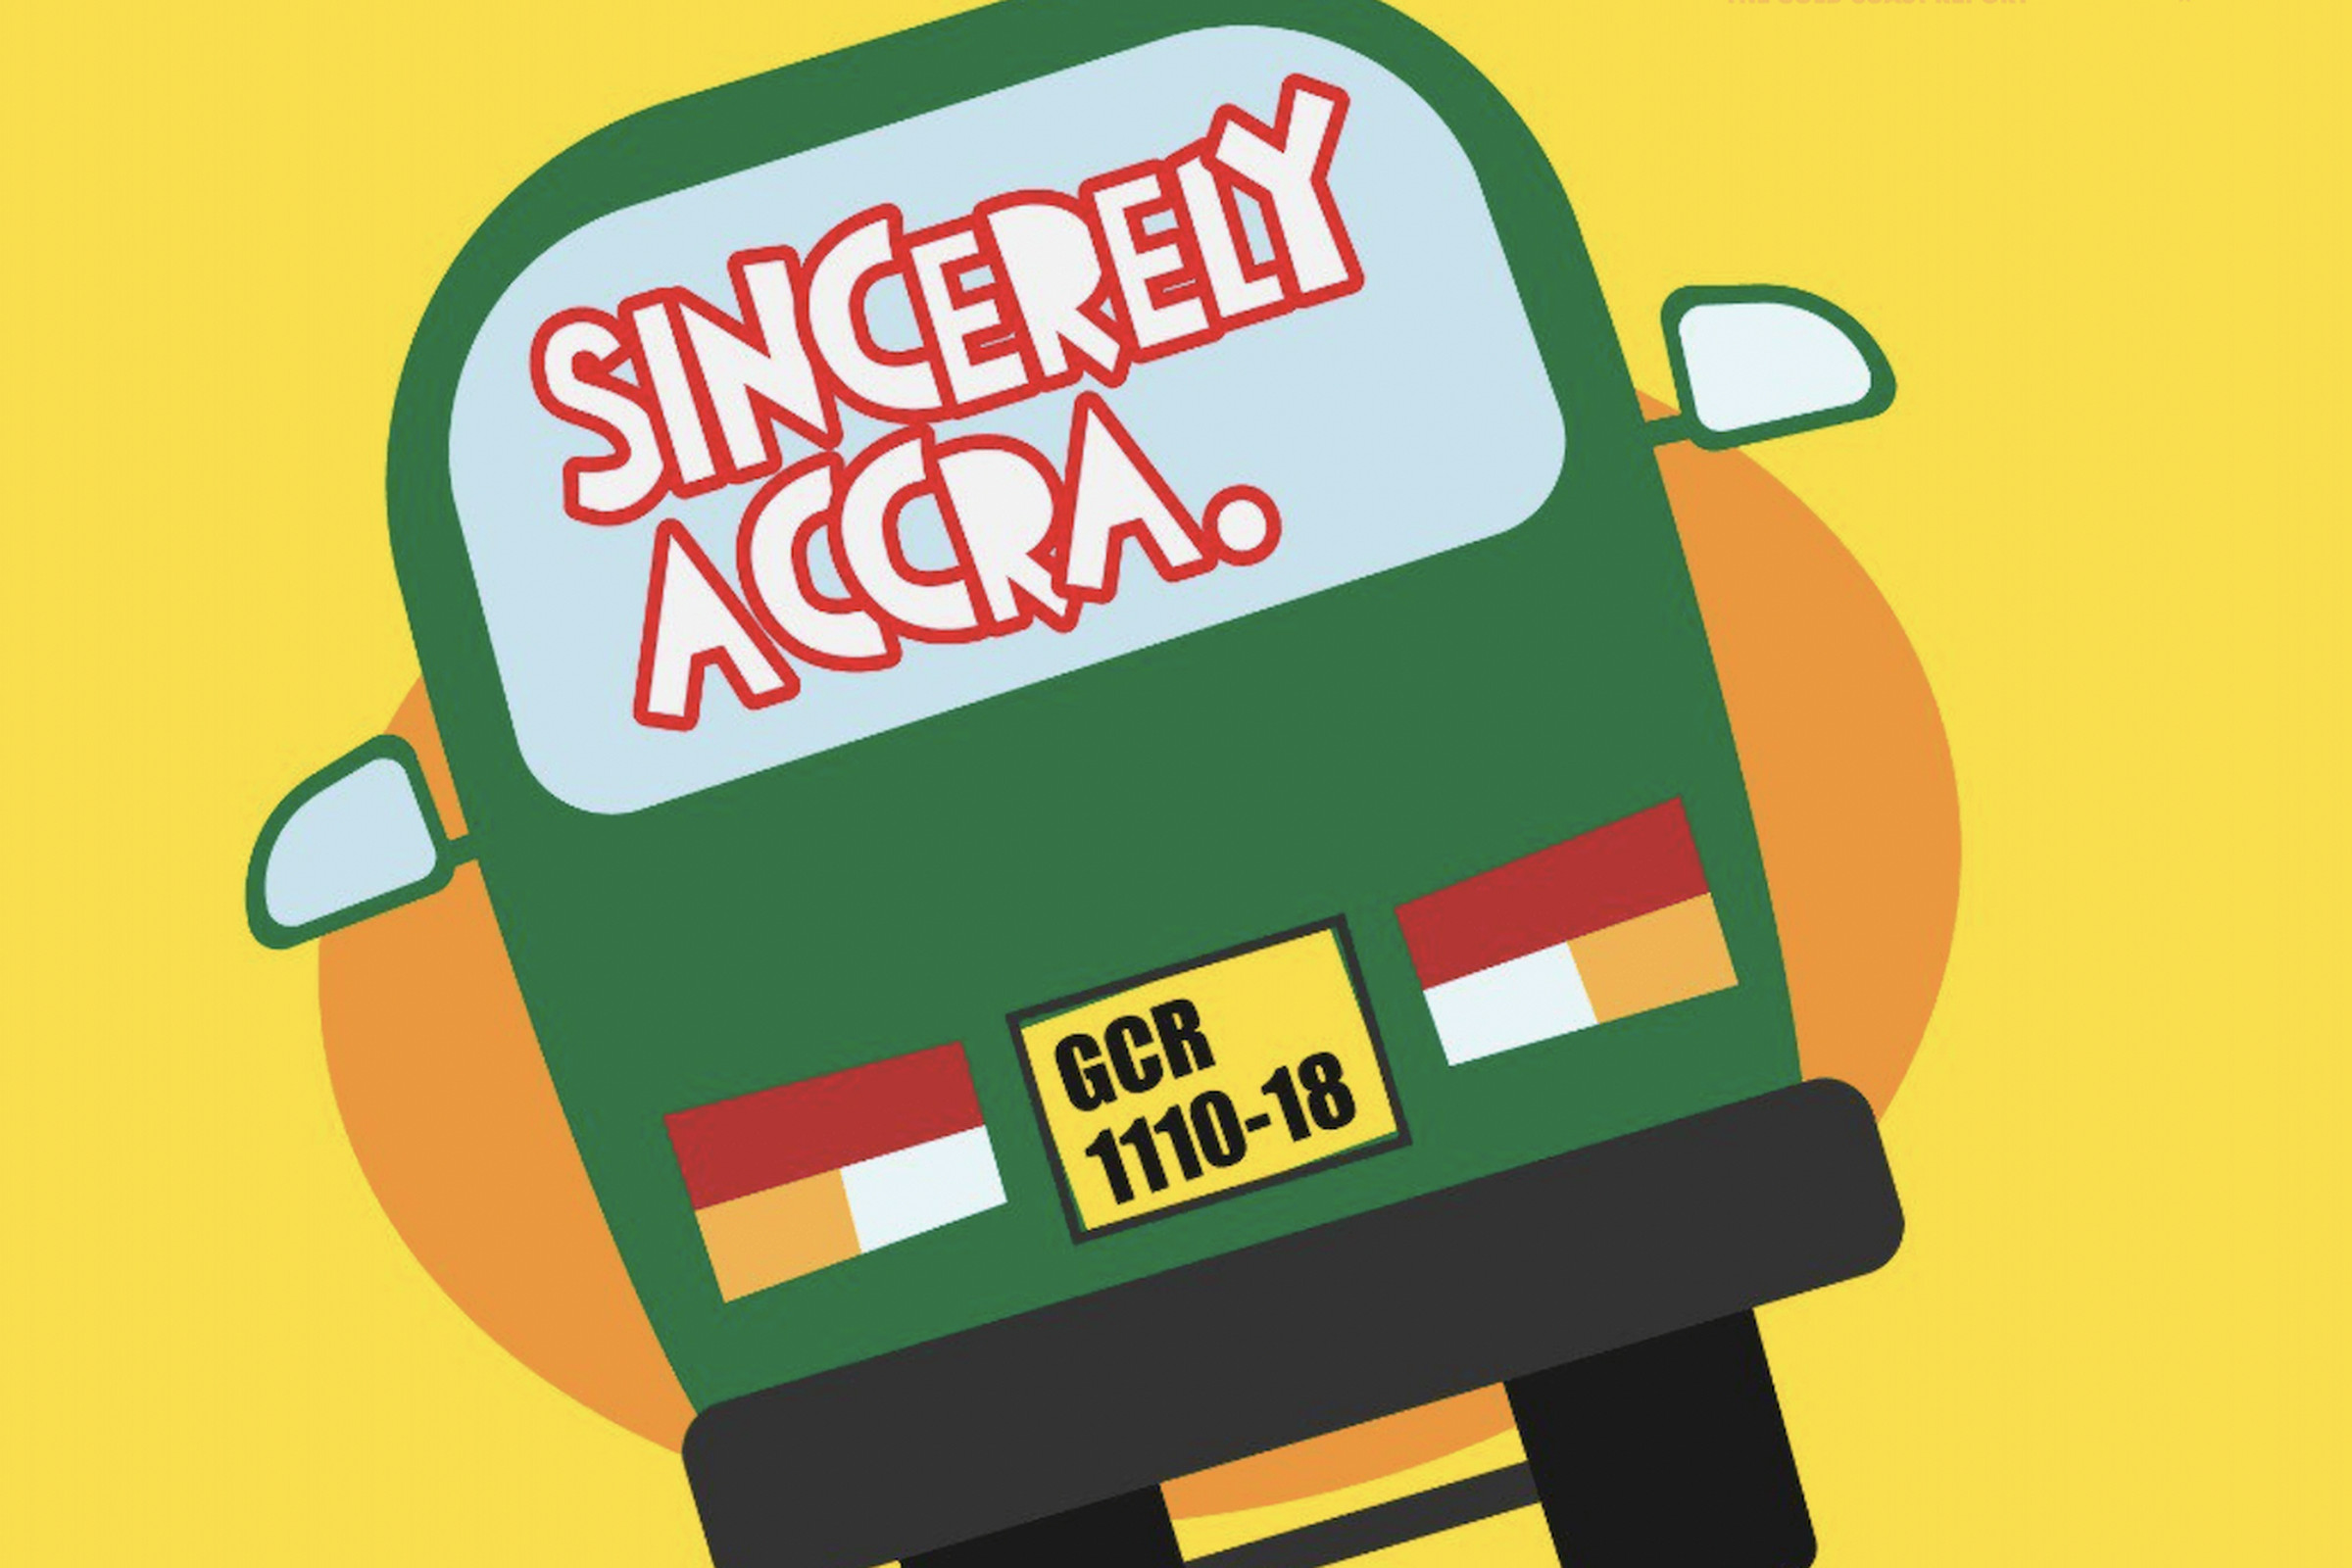 “Sincerely Accra” is a part of the Gold Coast Report podcast network.